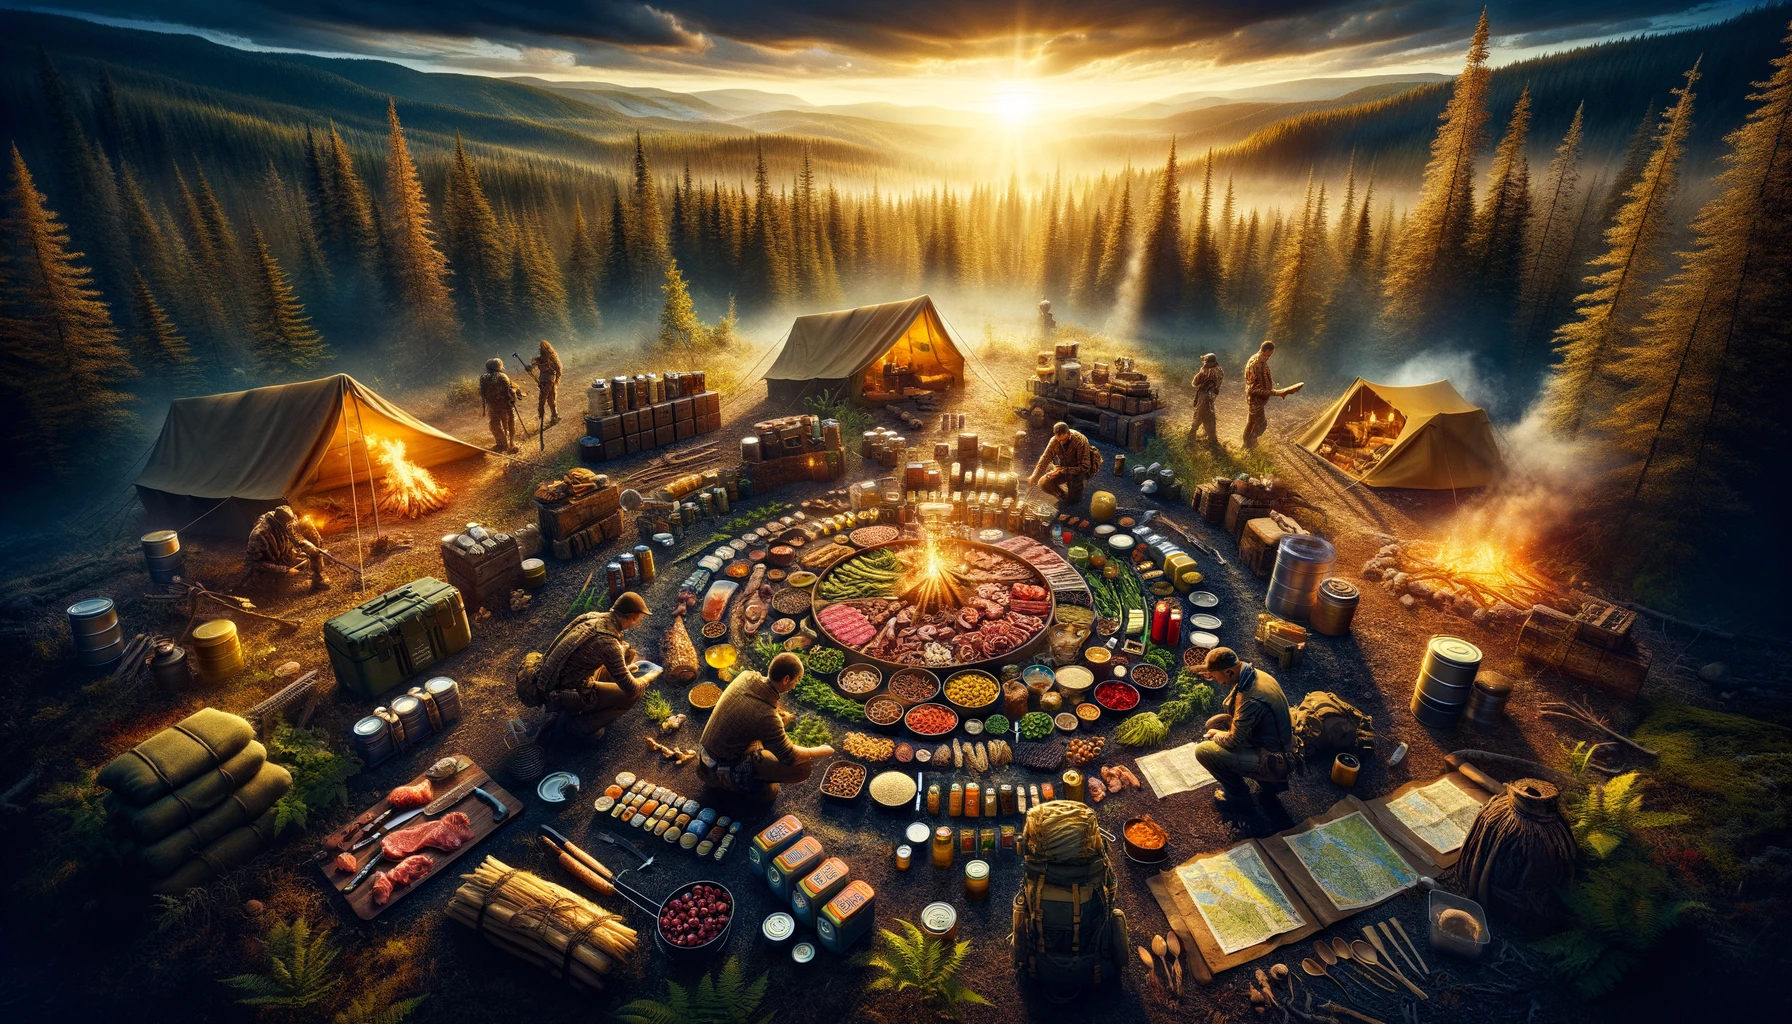 Dynamic survival camp scene with preppers engaged in dietary planning and survival tasks, showcasing essential foods and water purification, set during golden hour in a dense forest clearing, embodying preparedness and adaptability